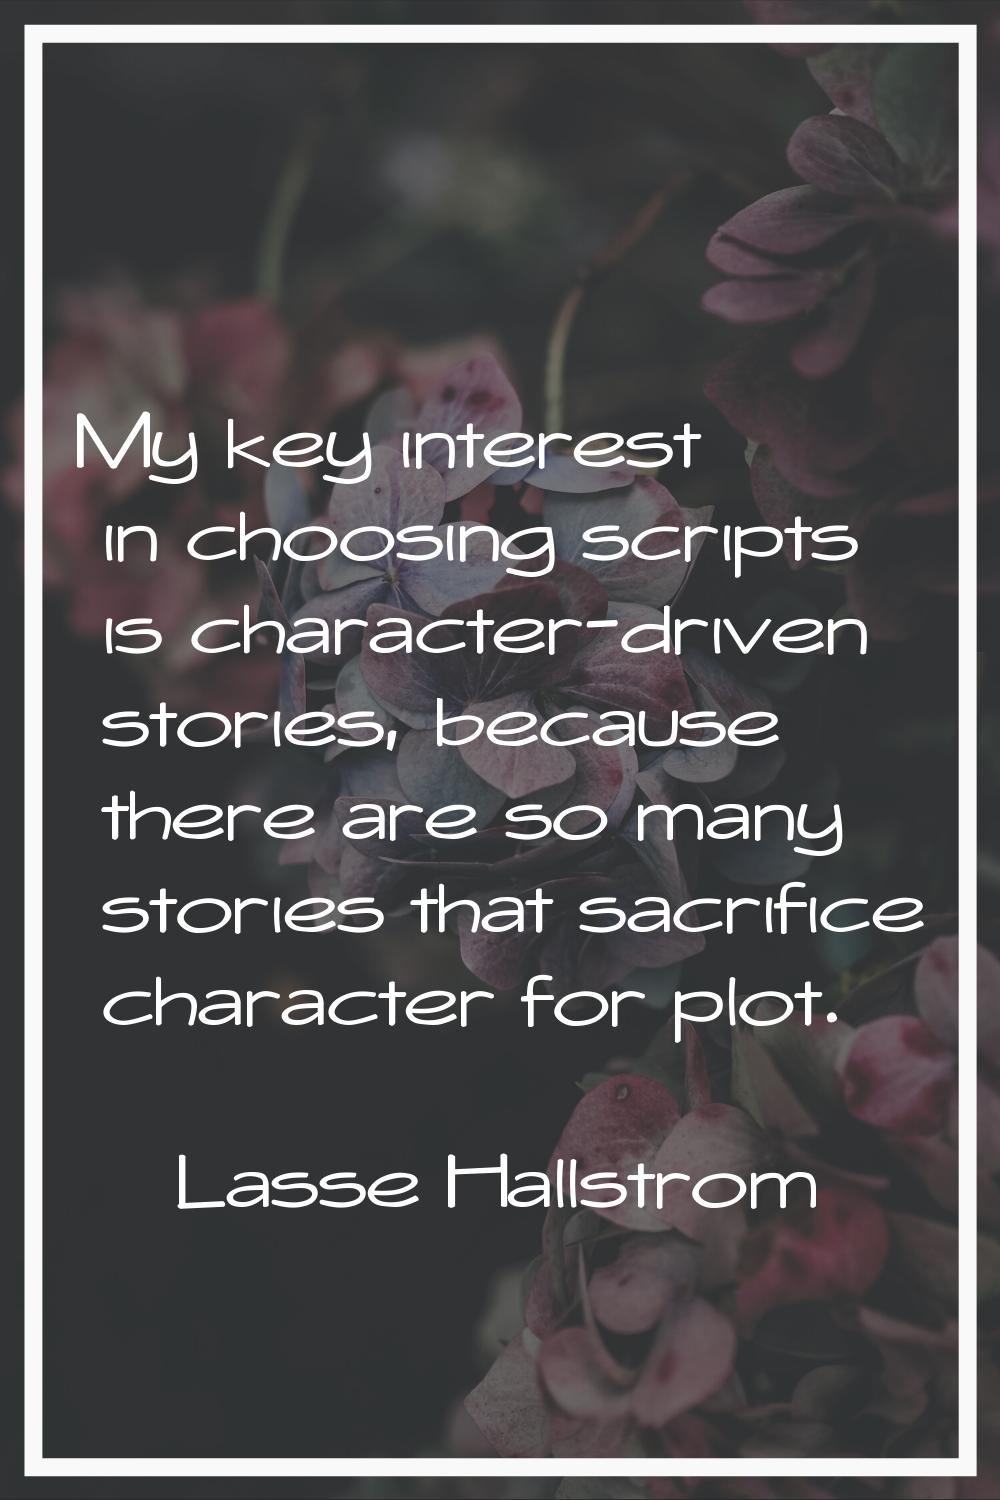 My key interest in choosing scripts is character-driven stories, because there are so many stories 